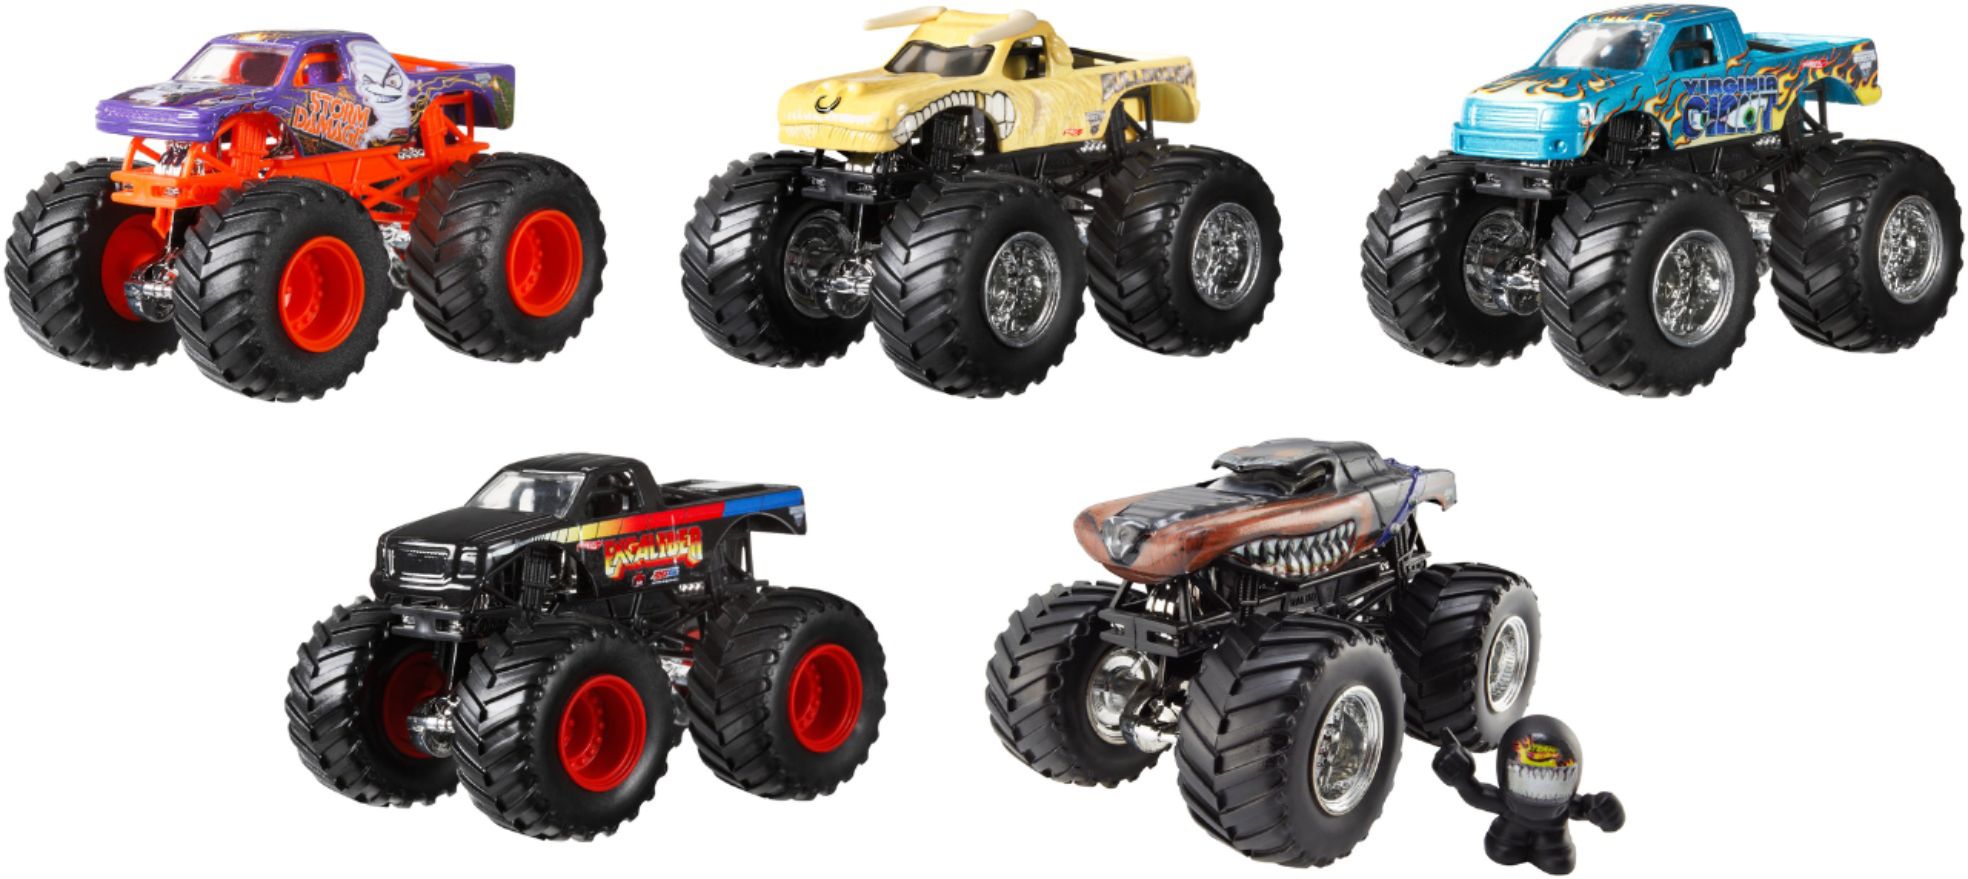 St. Jude patient designs Monster Jam toy truck, surprised with